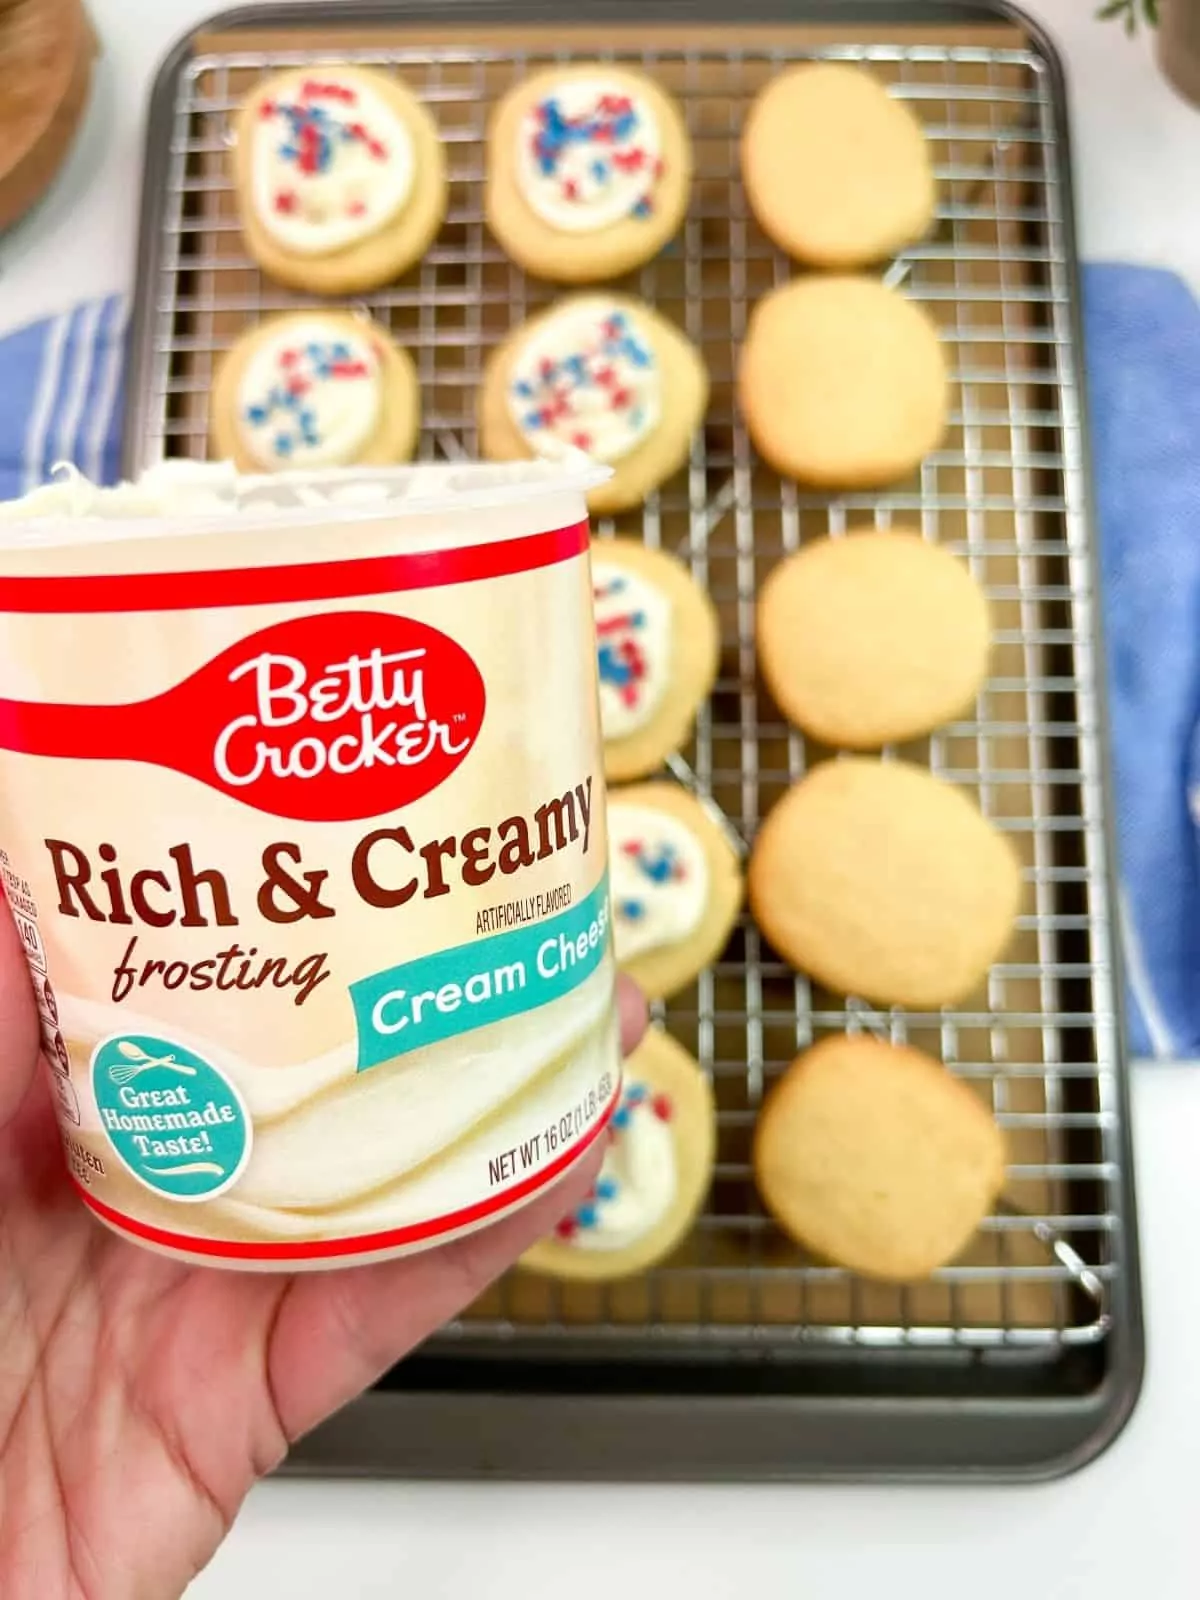 Canned cream cheese frosting being held over tray of baked cookies.